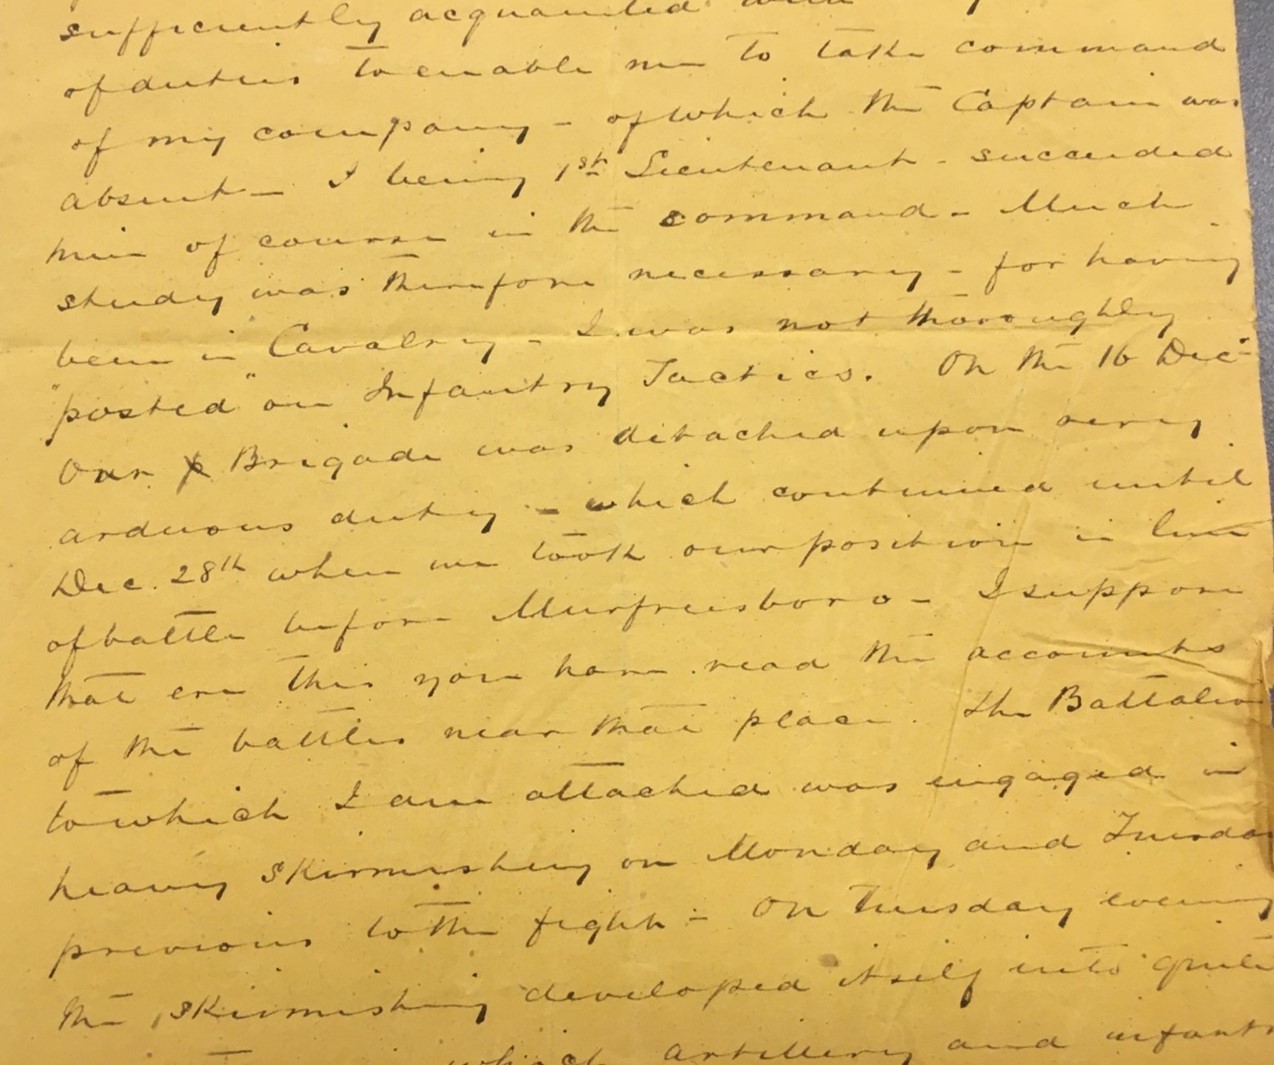 Letter from Lieutenant William Mead describing the Battle of Murfreesboro where he was injured. (January 19, 1862)